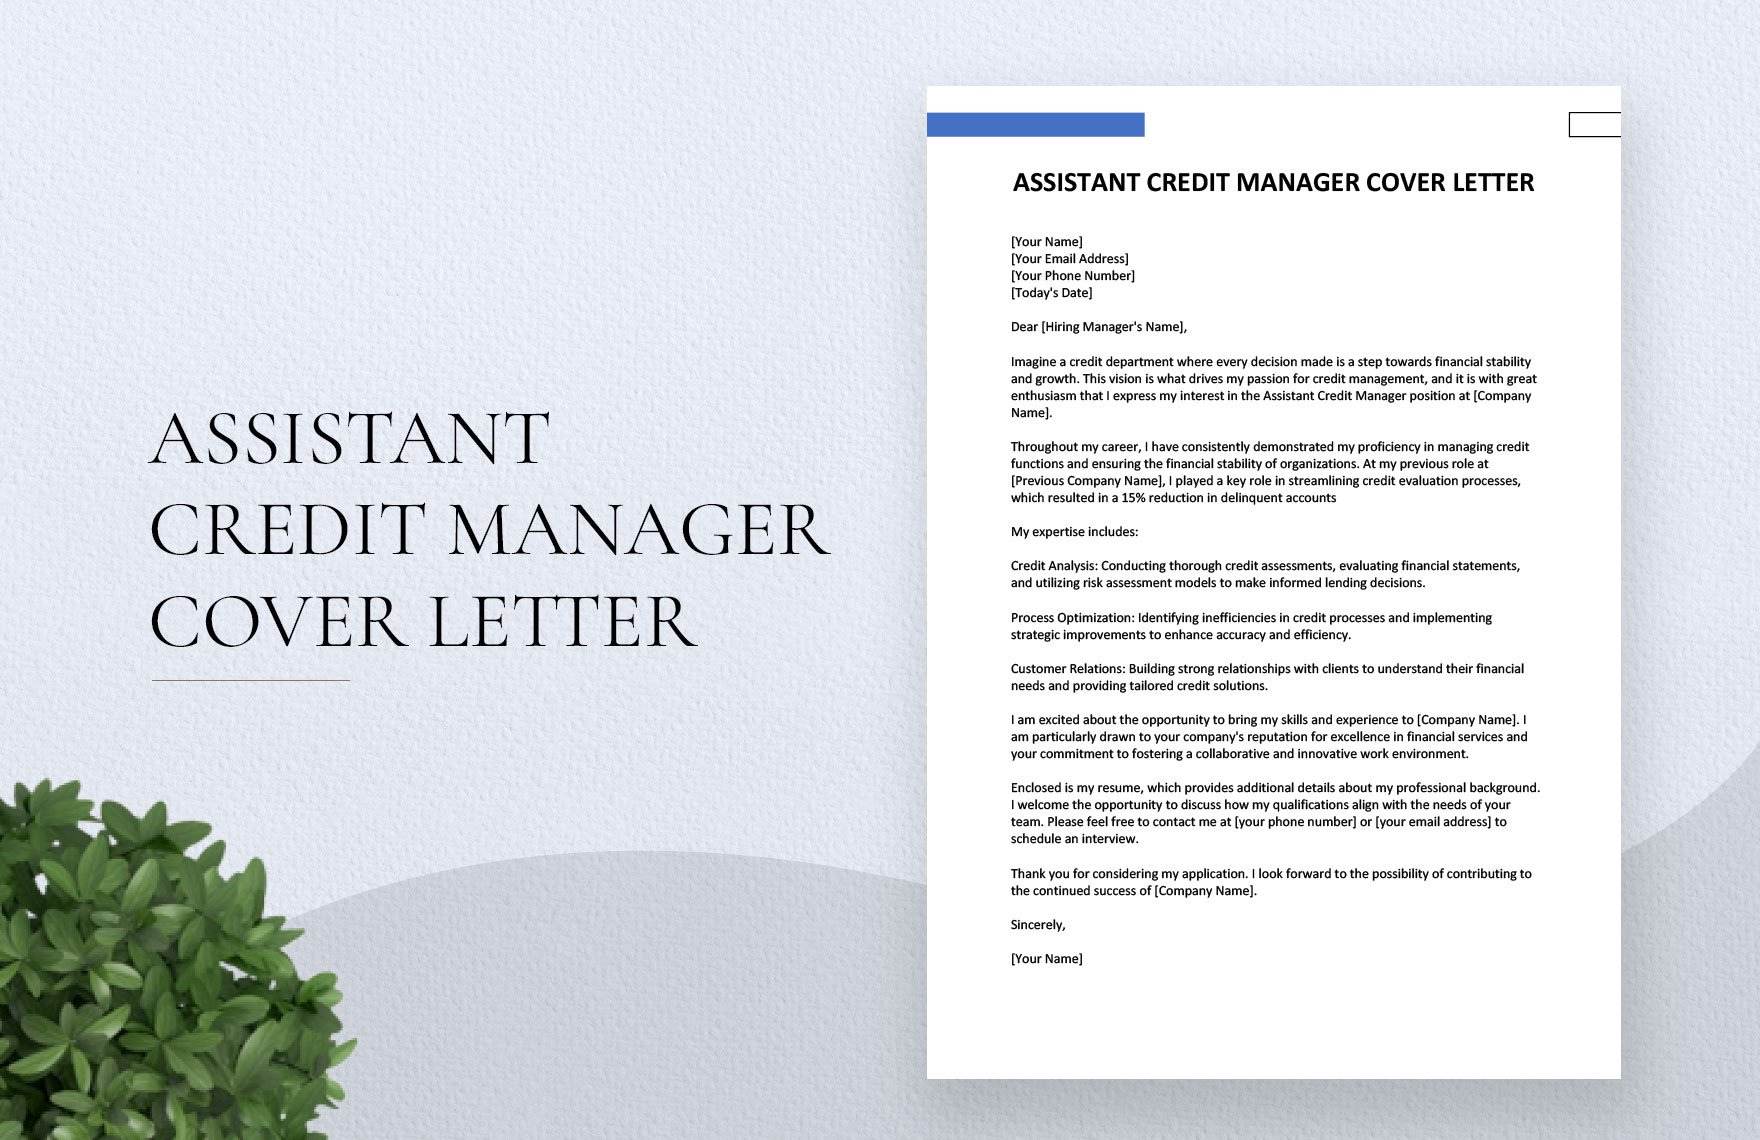 Assistant Credit Manager Cover Letter